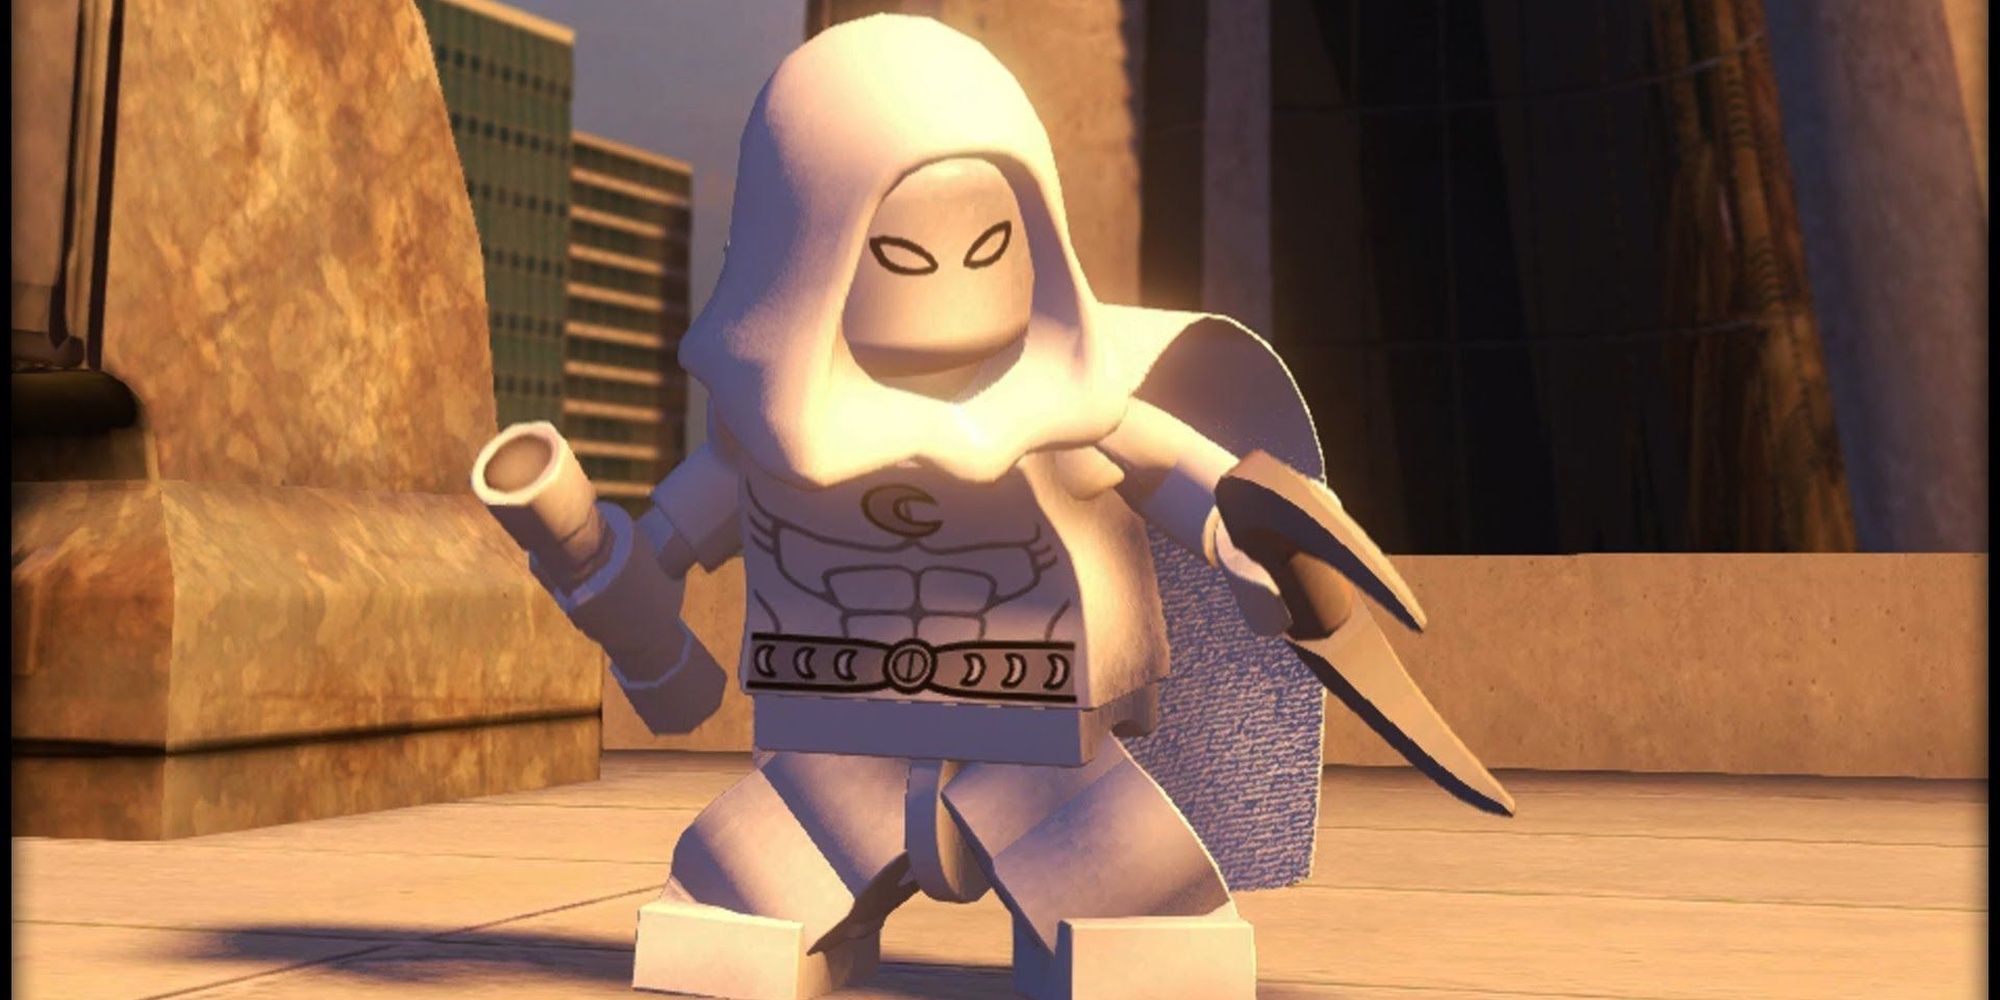 Moon Knight featured in Lego Marvel's Avengers